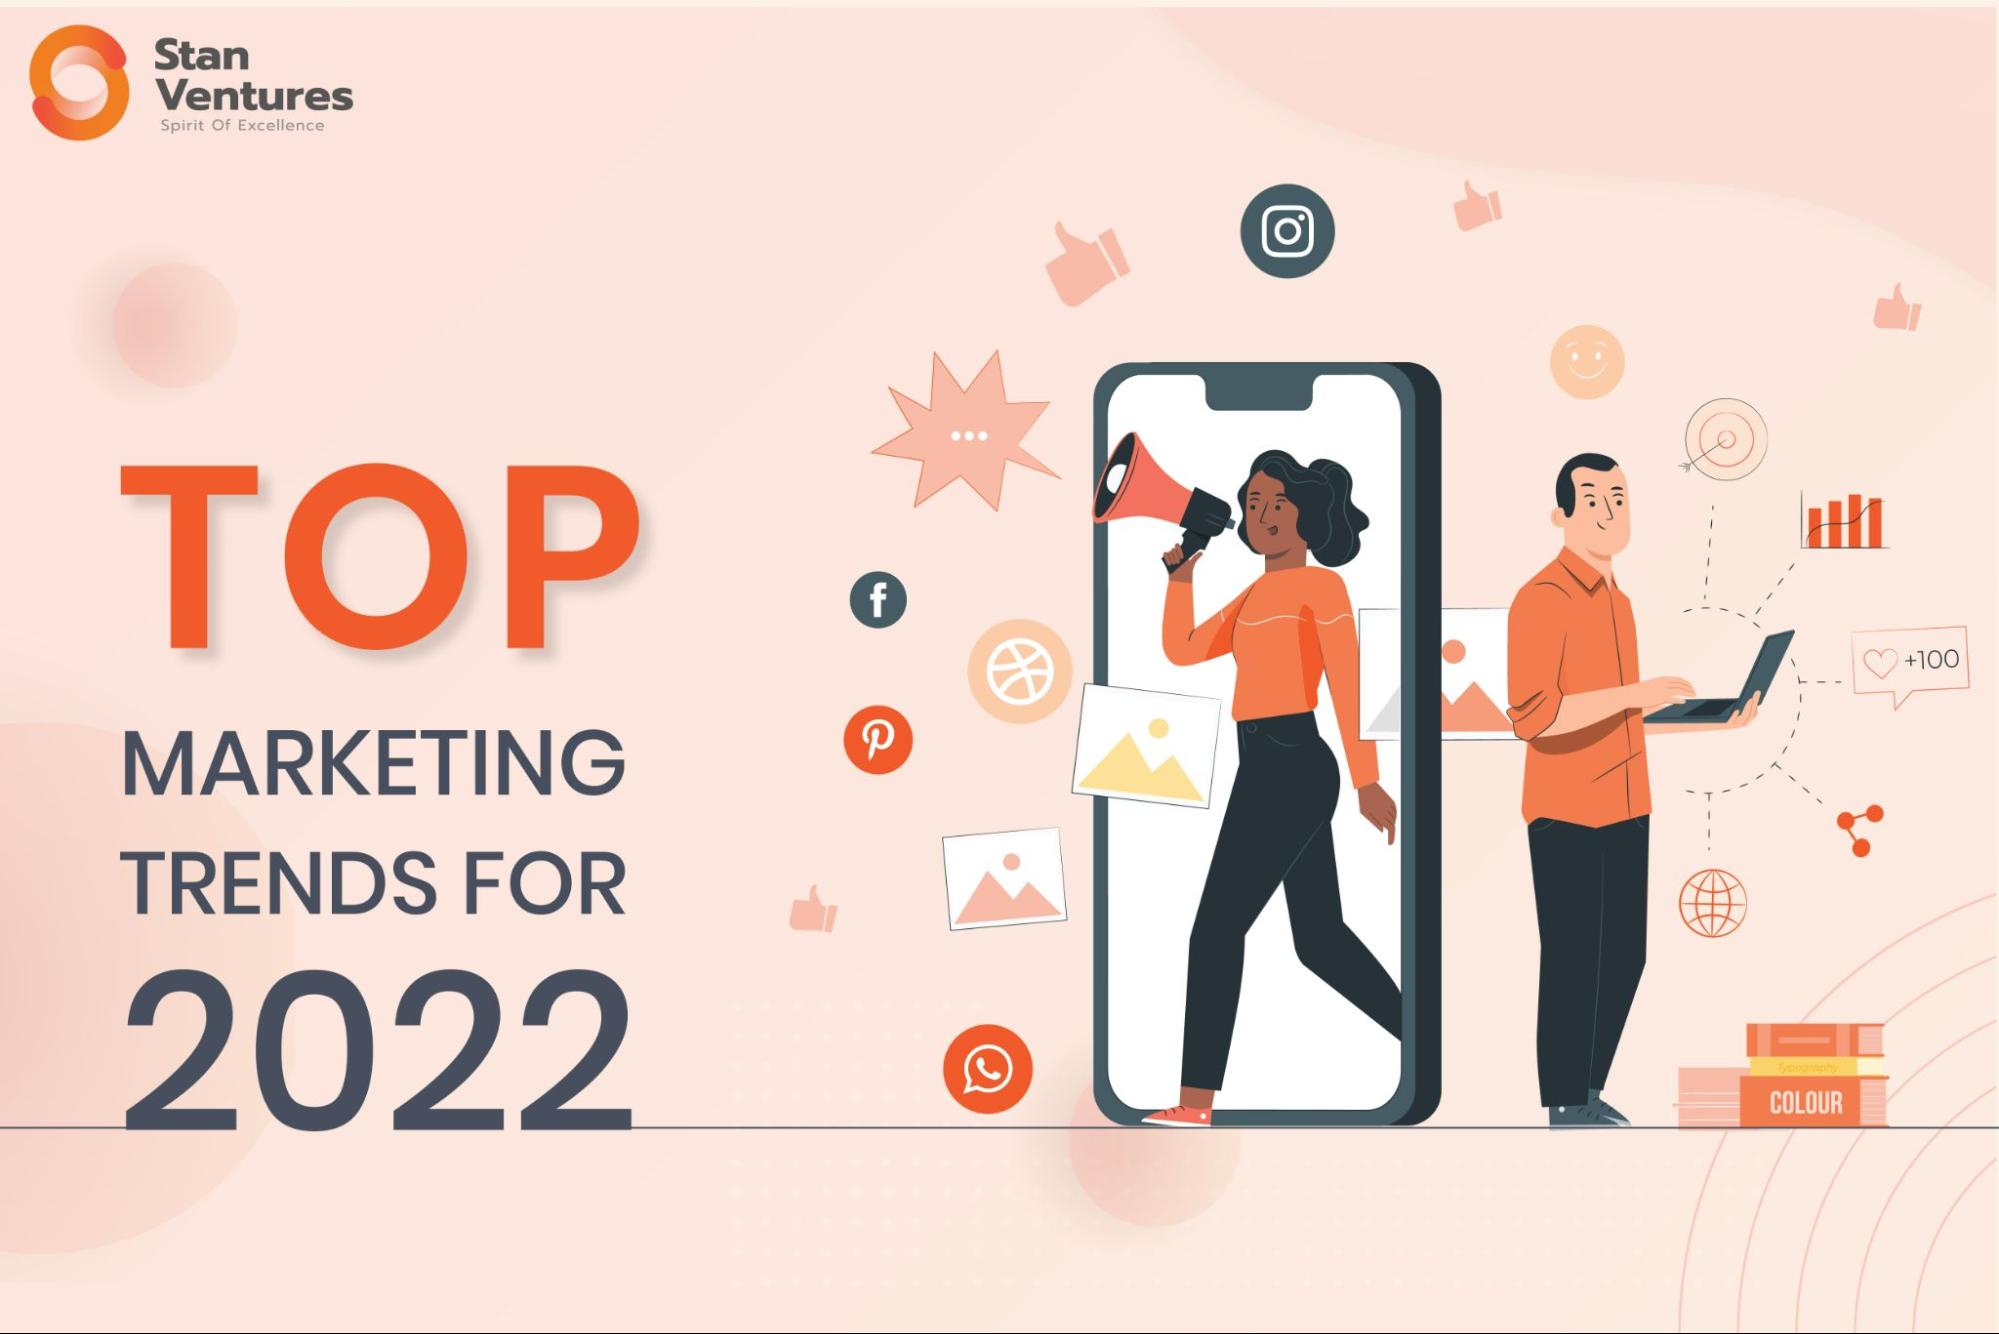 Top Marketing Trends for 2022